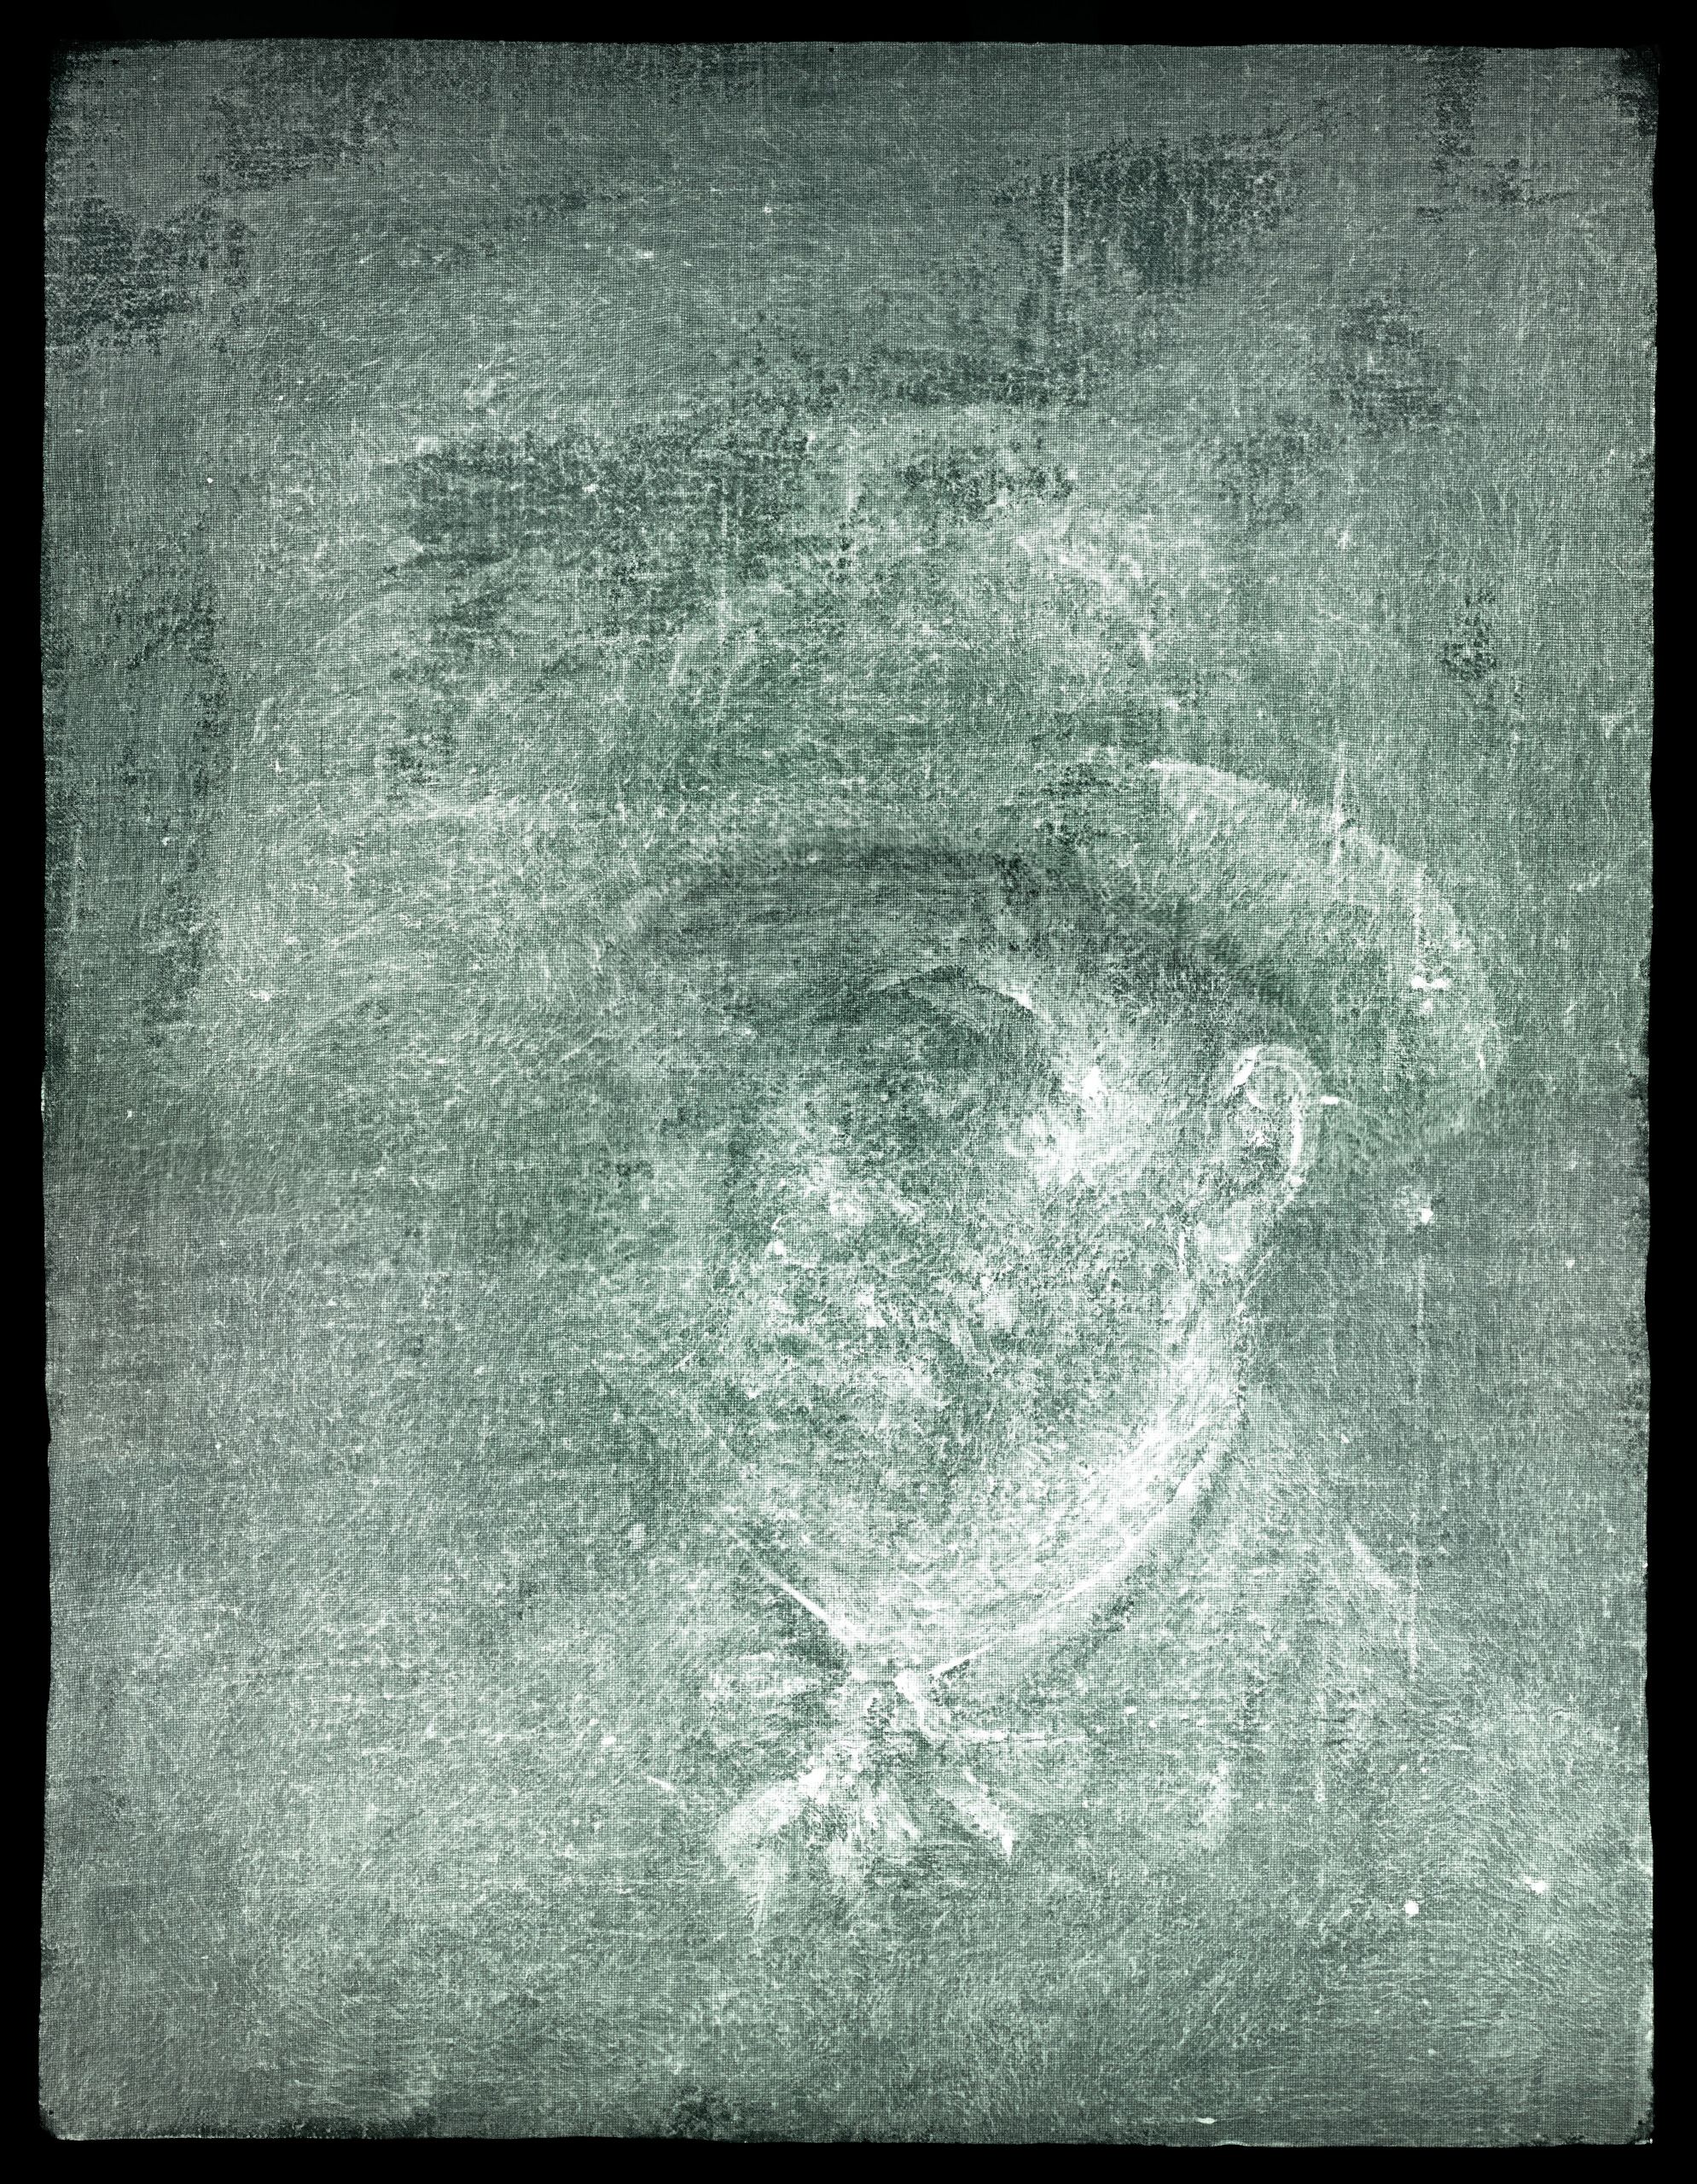 X-ray image believed to show a self-portrait of Vincent Van Gogh 